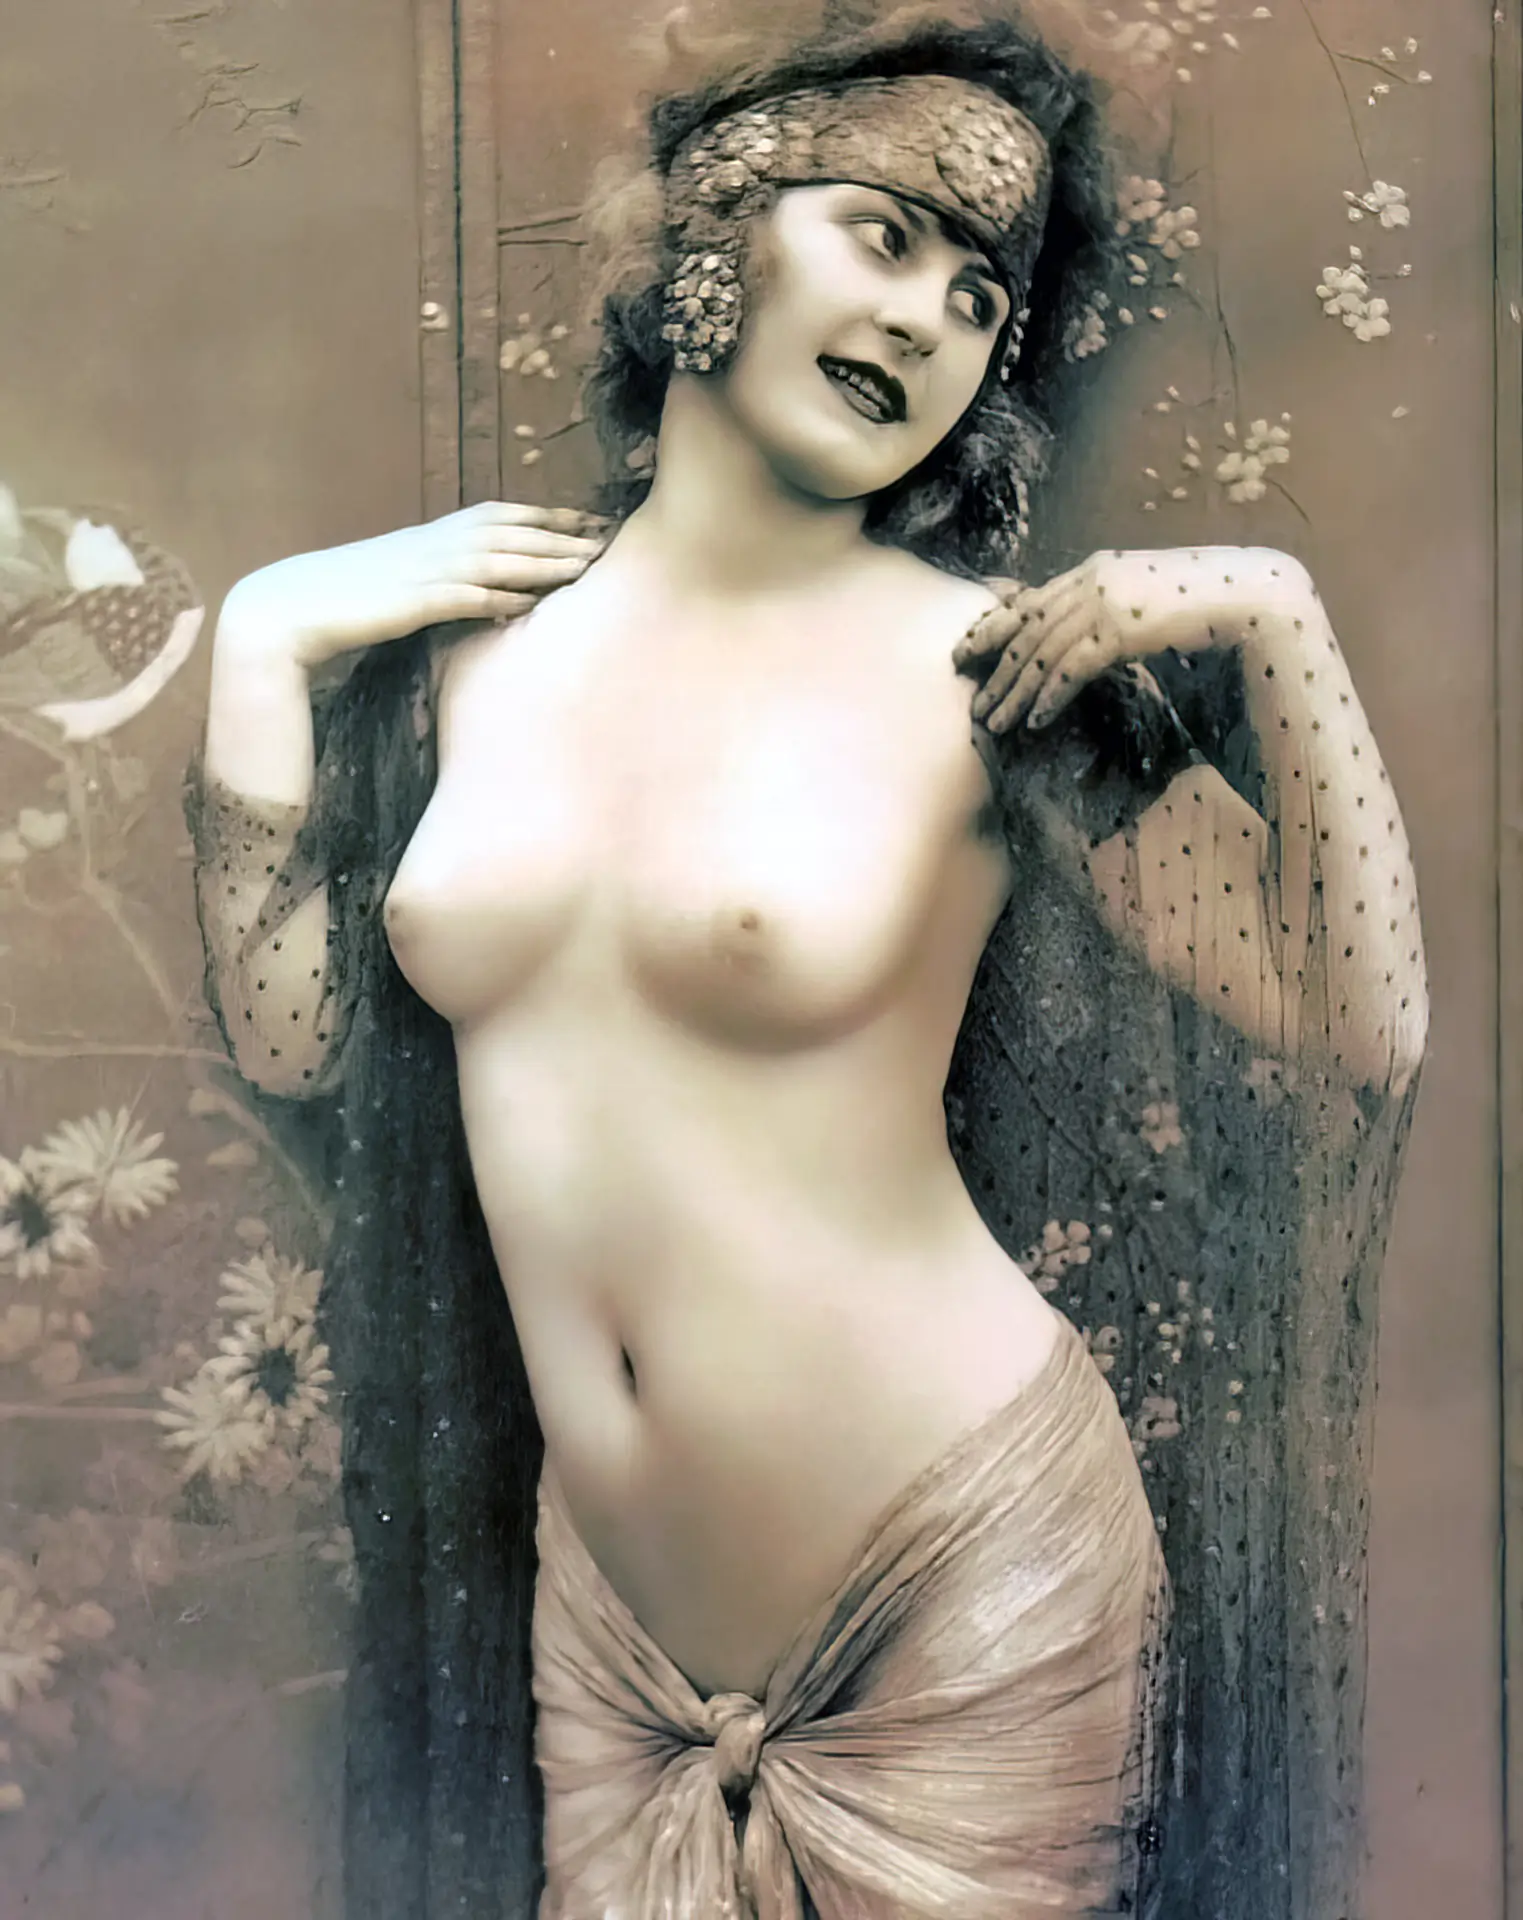 Classy vintage lady shows off her naked breasts as she poses